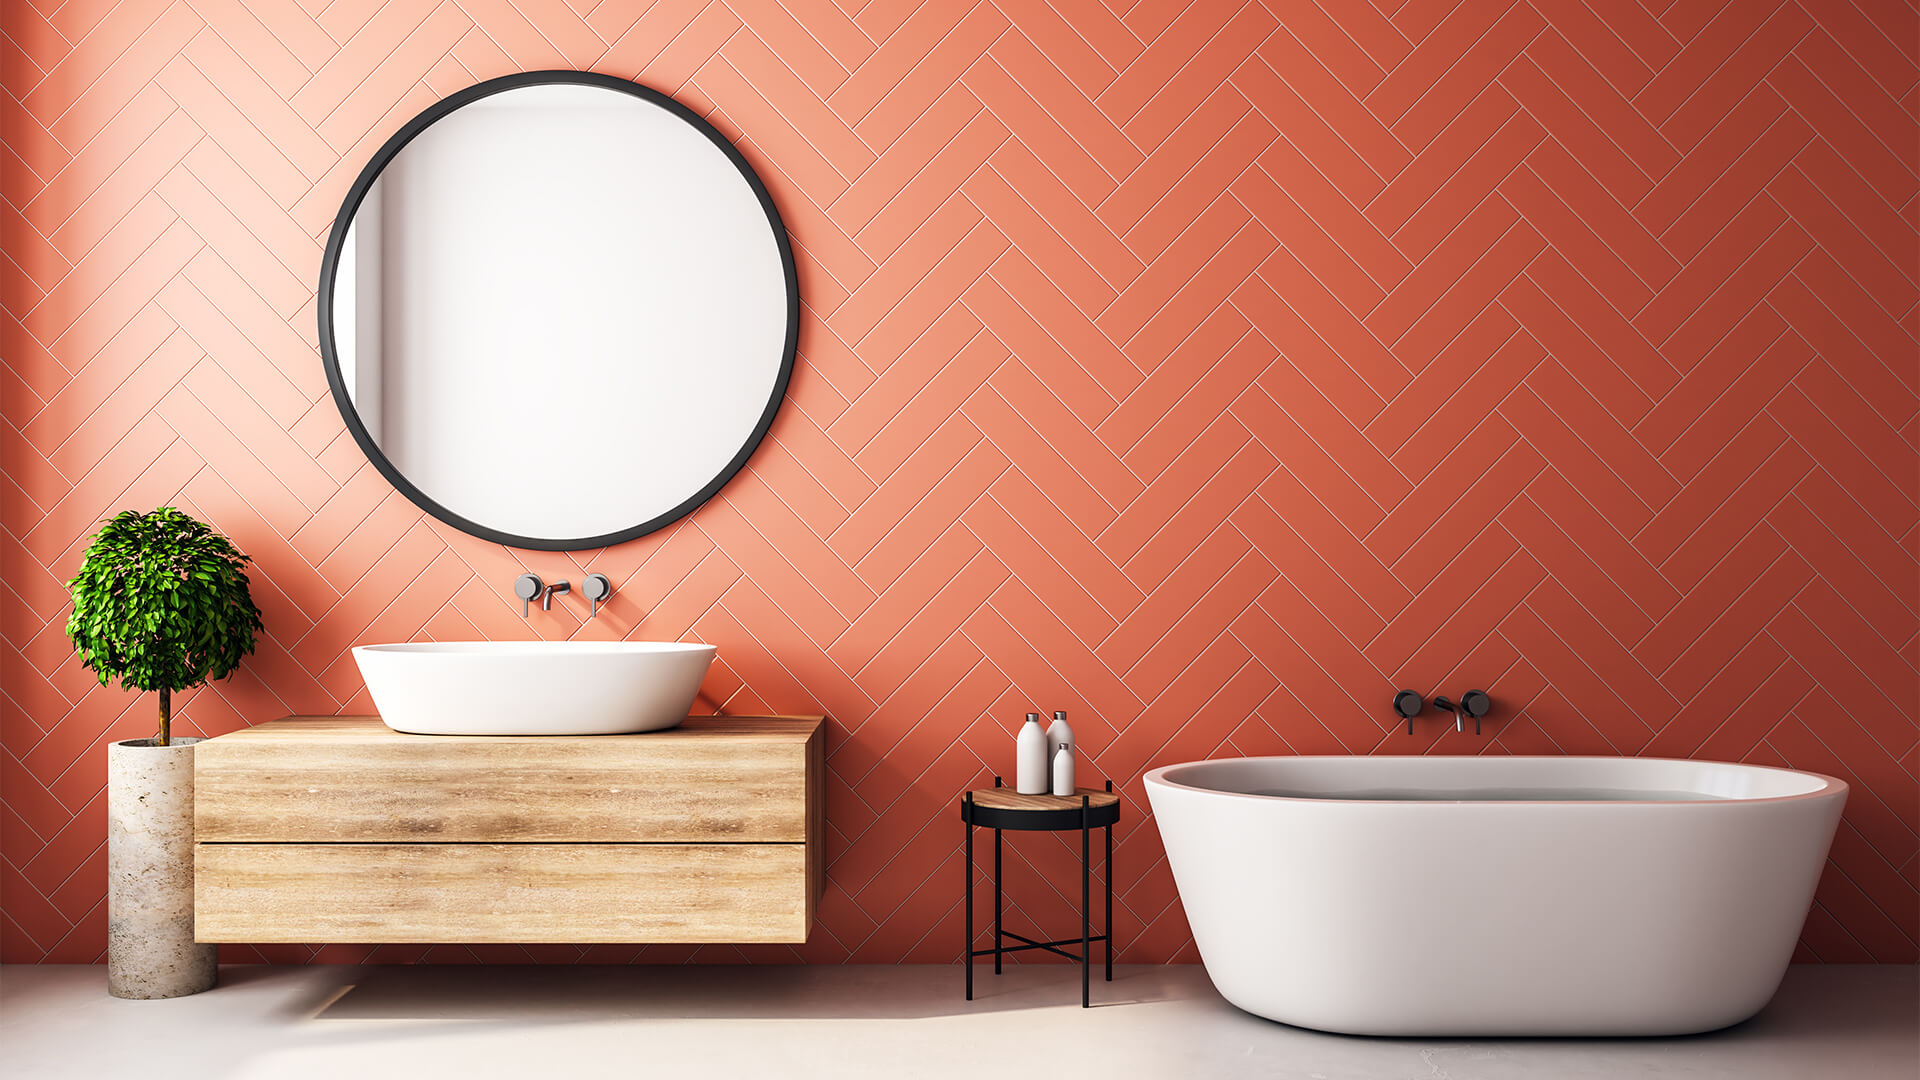 Bathroom with terracotta tiles on the walls, and a freestanding white bath